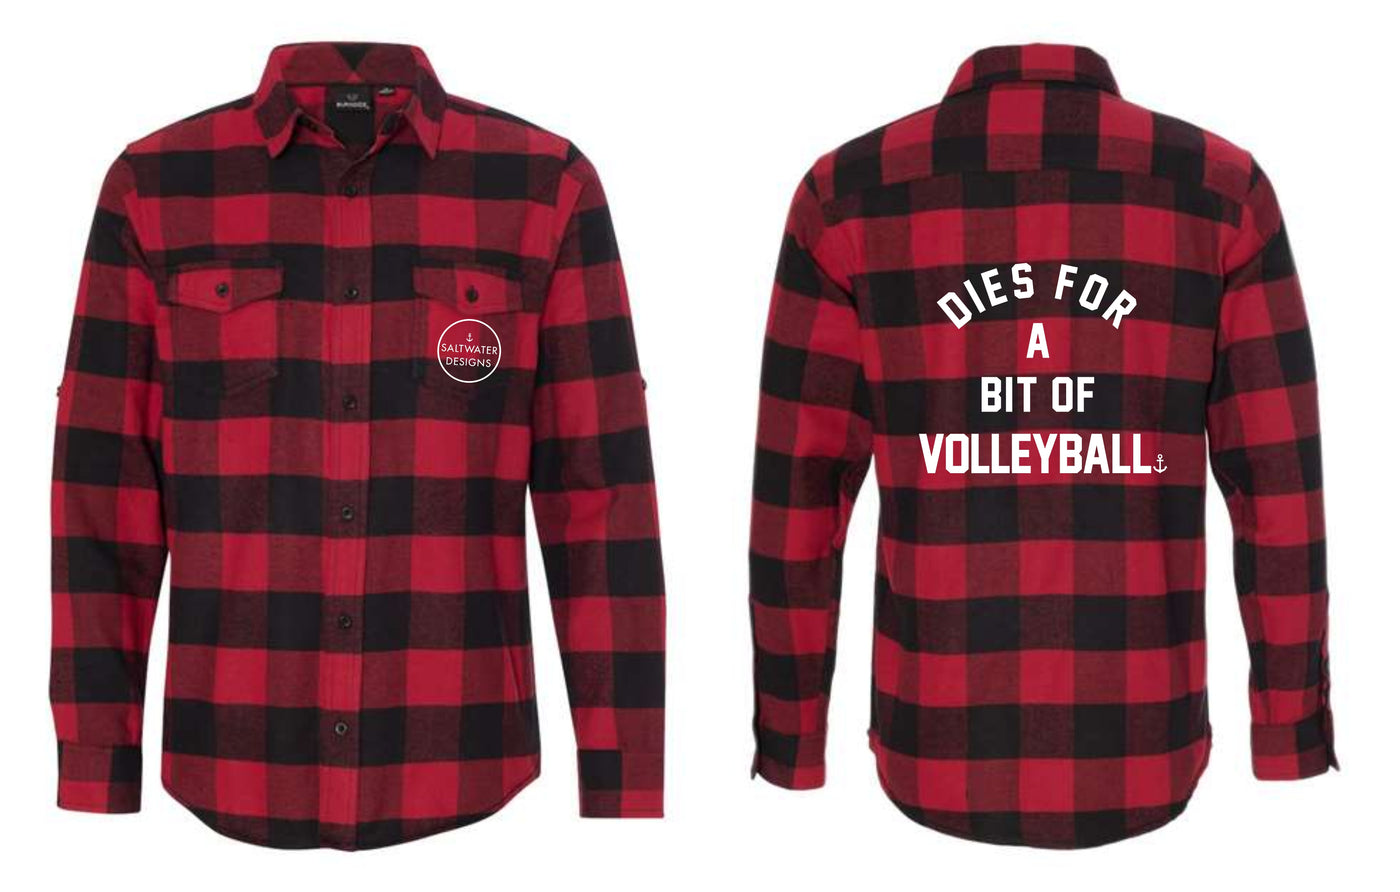 "Dies For A Bit Of Volleyball" Unisex Plaid Flannel Shirt